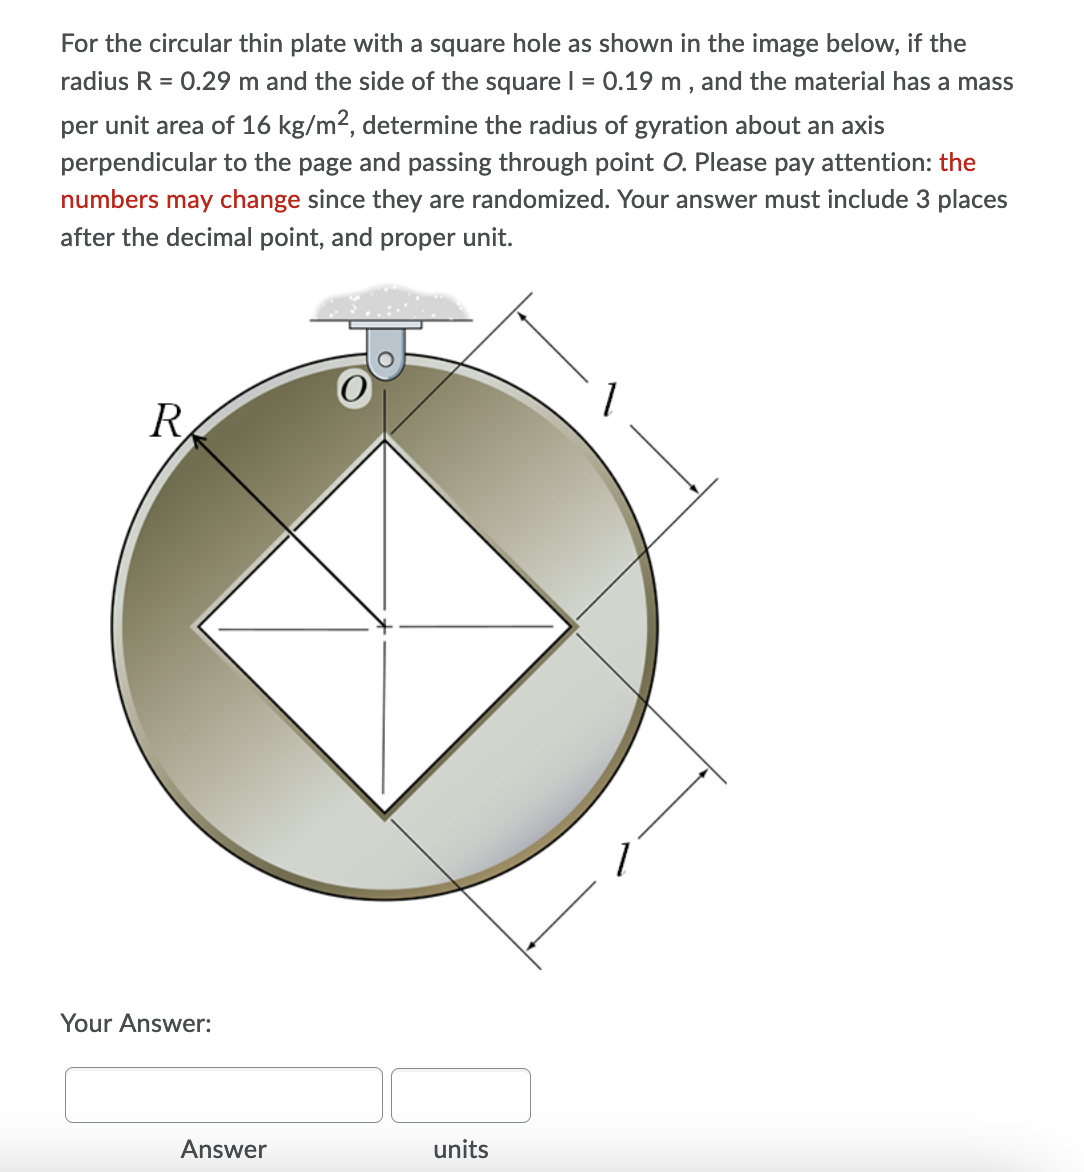 For the circular thin plate with a square hole as shown in the image below, if the
radius R = 0.29 m and the side of the square I = 0.19 m , and the material has a mass
per unit area of 16 kg/m2, determine the radius of gyration about an axis
perpendicular to the page and passing through point O. Please pay attention: the
numbers may change since they are randomized. Your answer must include 3 places
after the decimal point, and proper unit.
R.
Your Answer:
Answer
units
